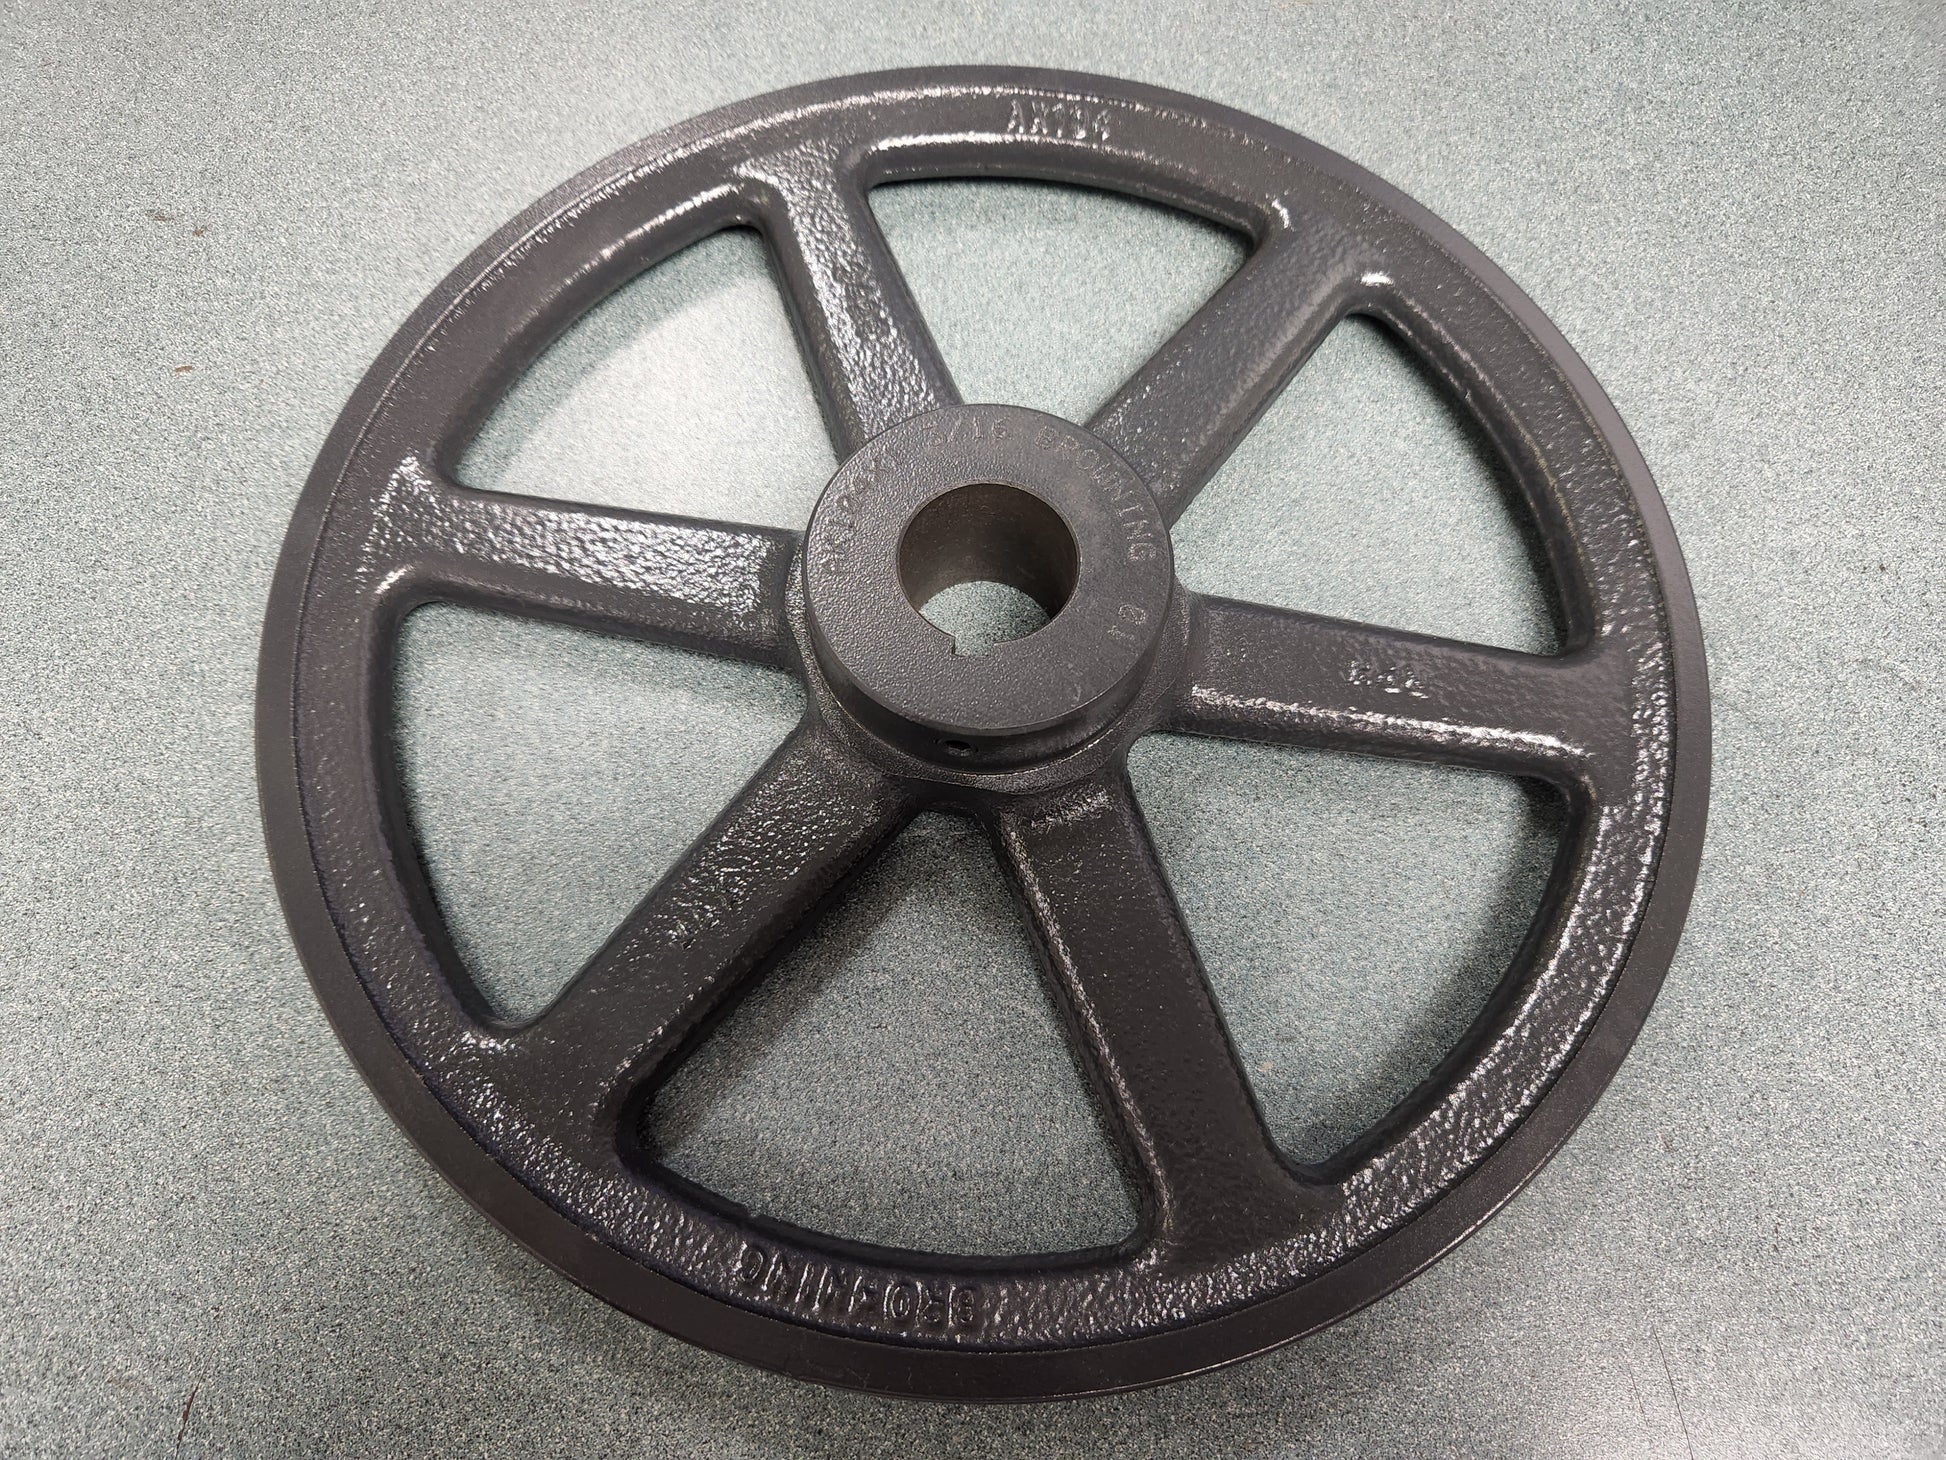 10" SINGLE GROOVE PULLEY 1-3/16" BORE